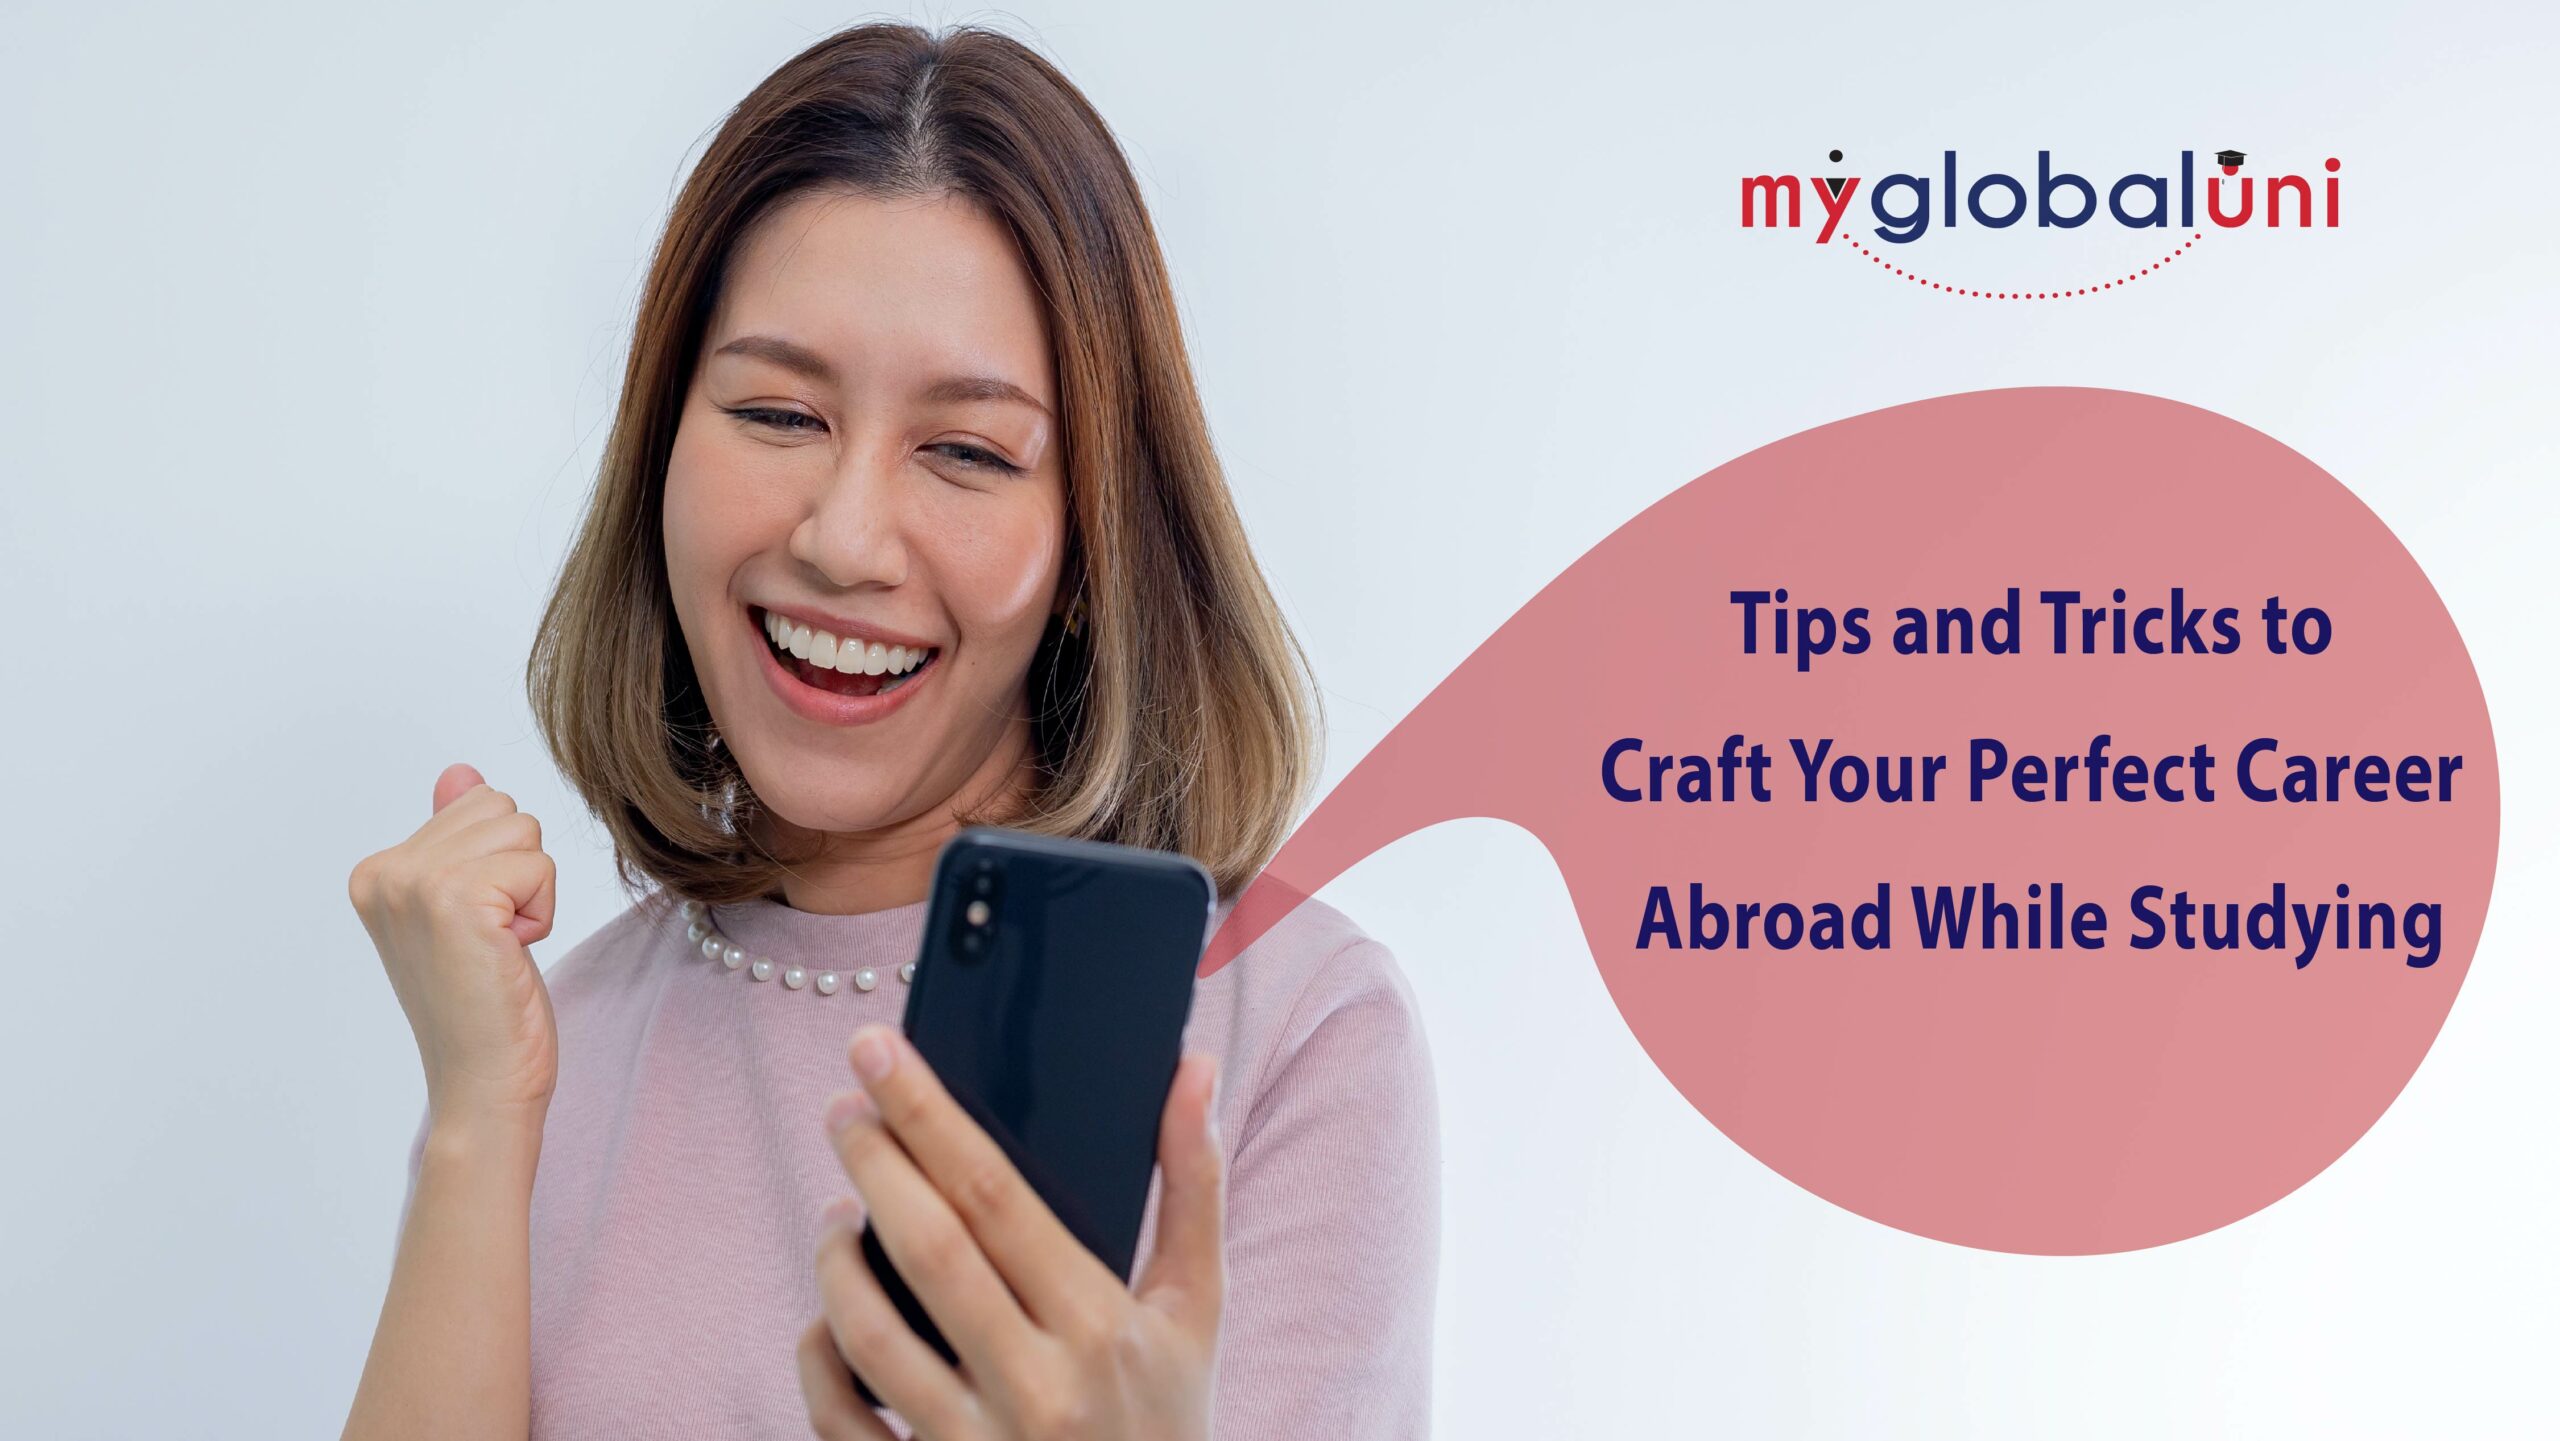 Tips and Tricks to Craft Your Perfect Career Abroad While Studying